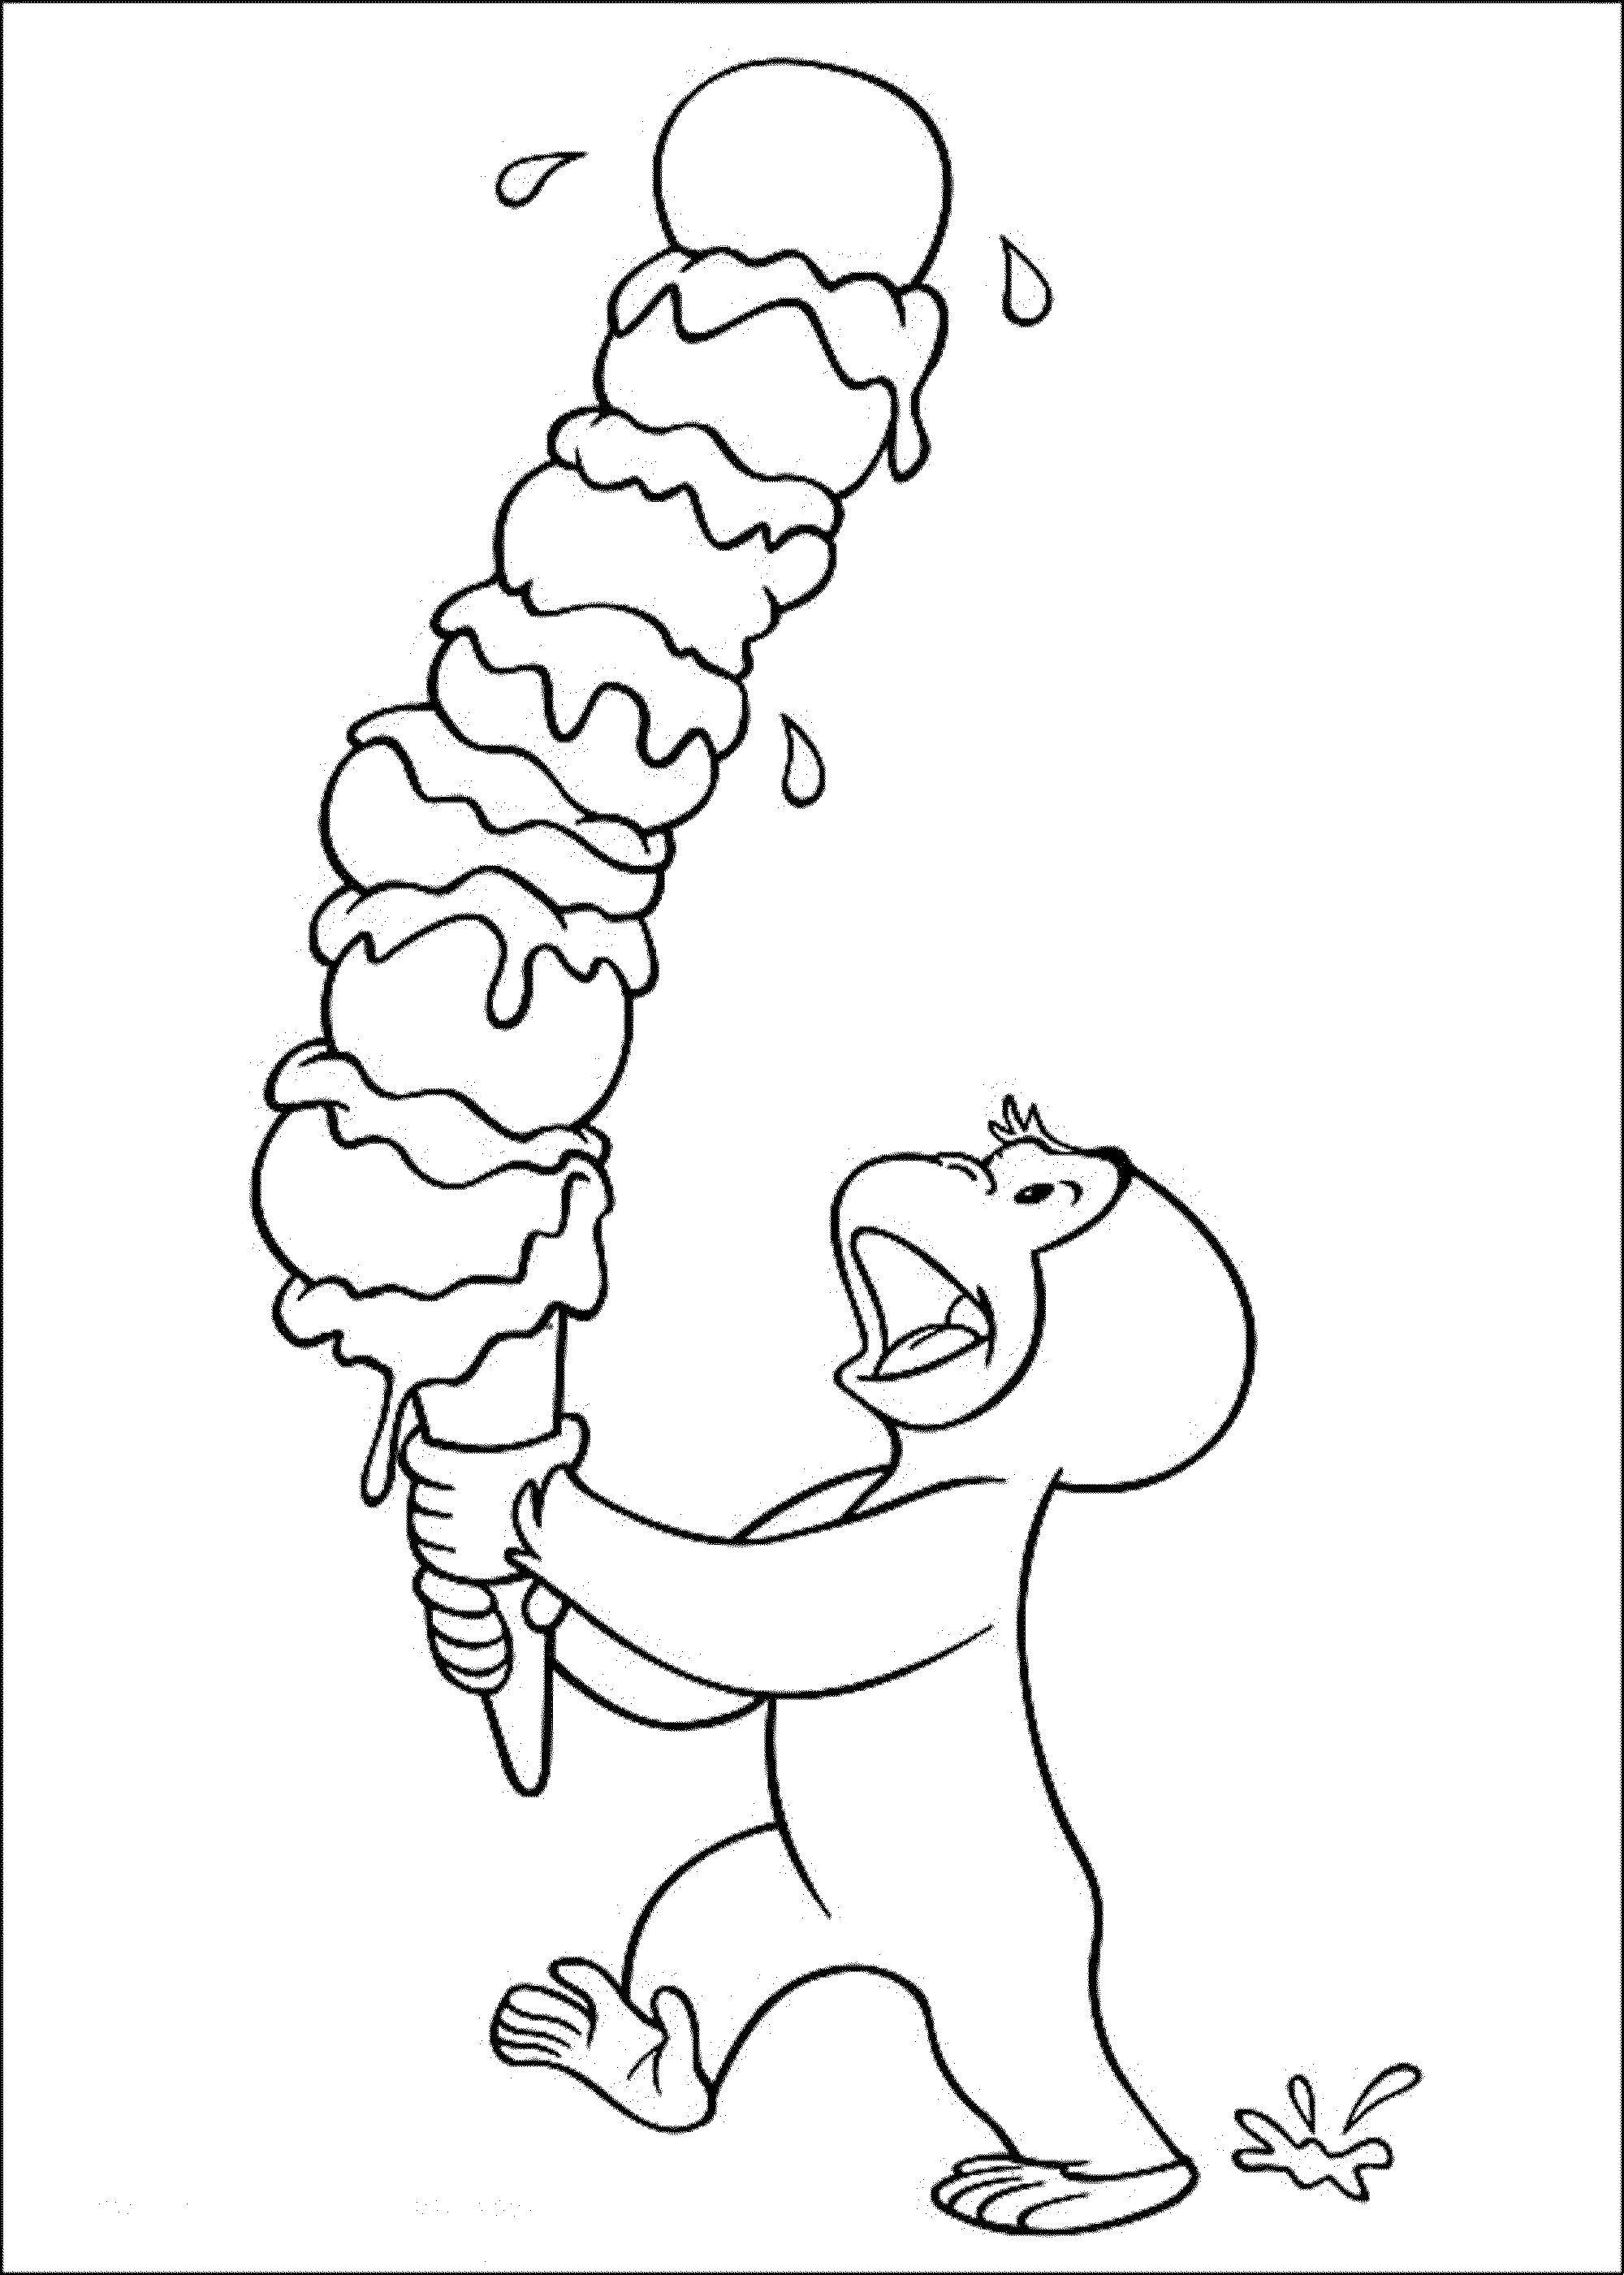 Coloring Monkey carries ice cream. Category ice cream. Tags:  ice cream, monkey.